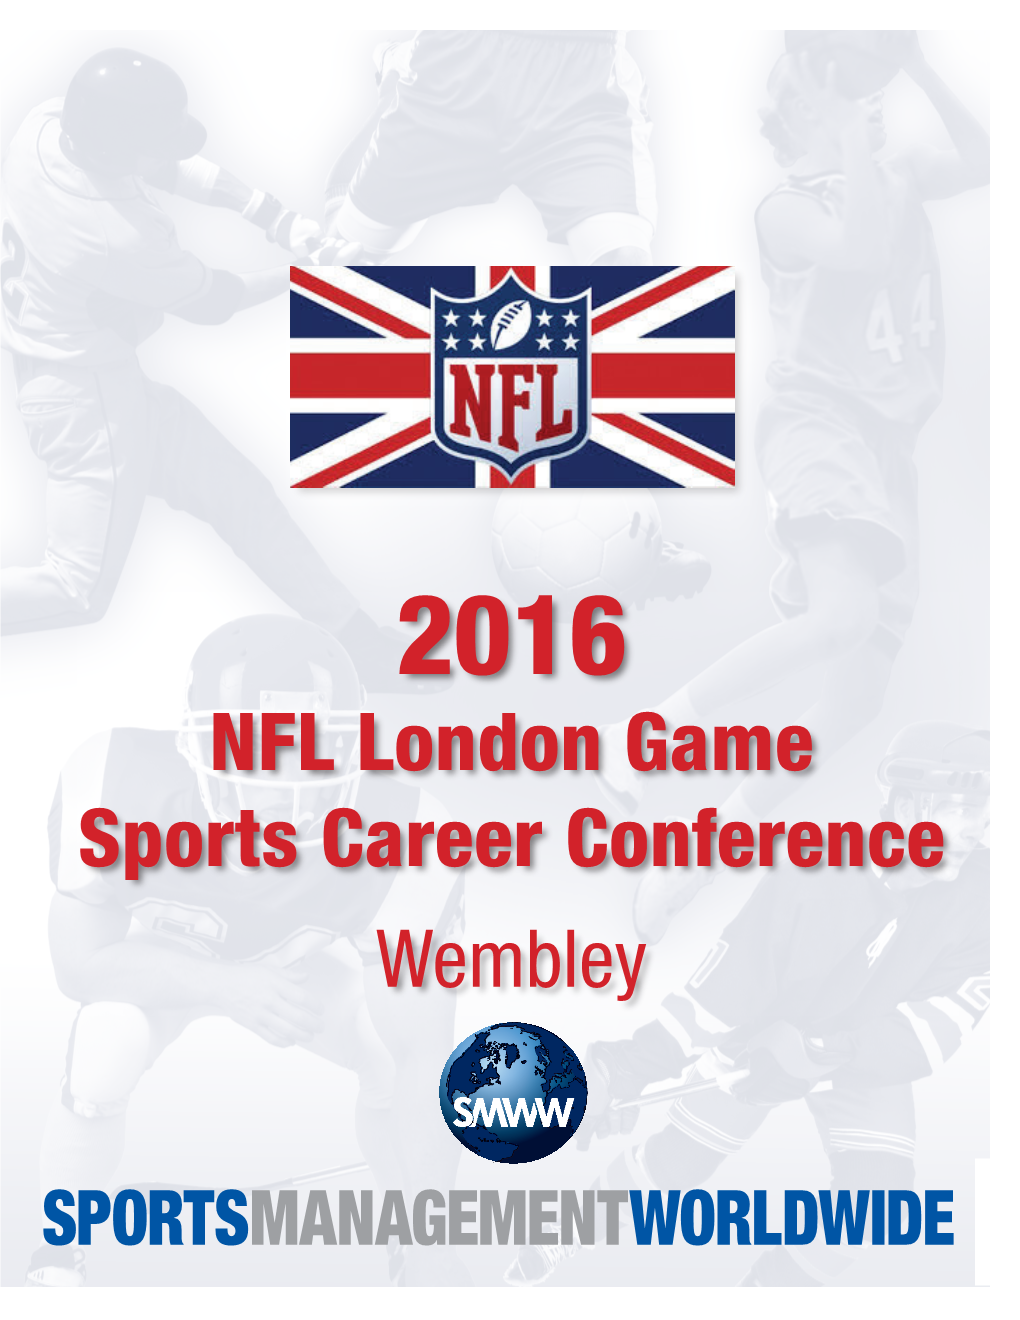 NFL London Game Sports Career Conference Wembley